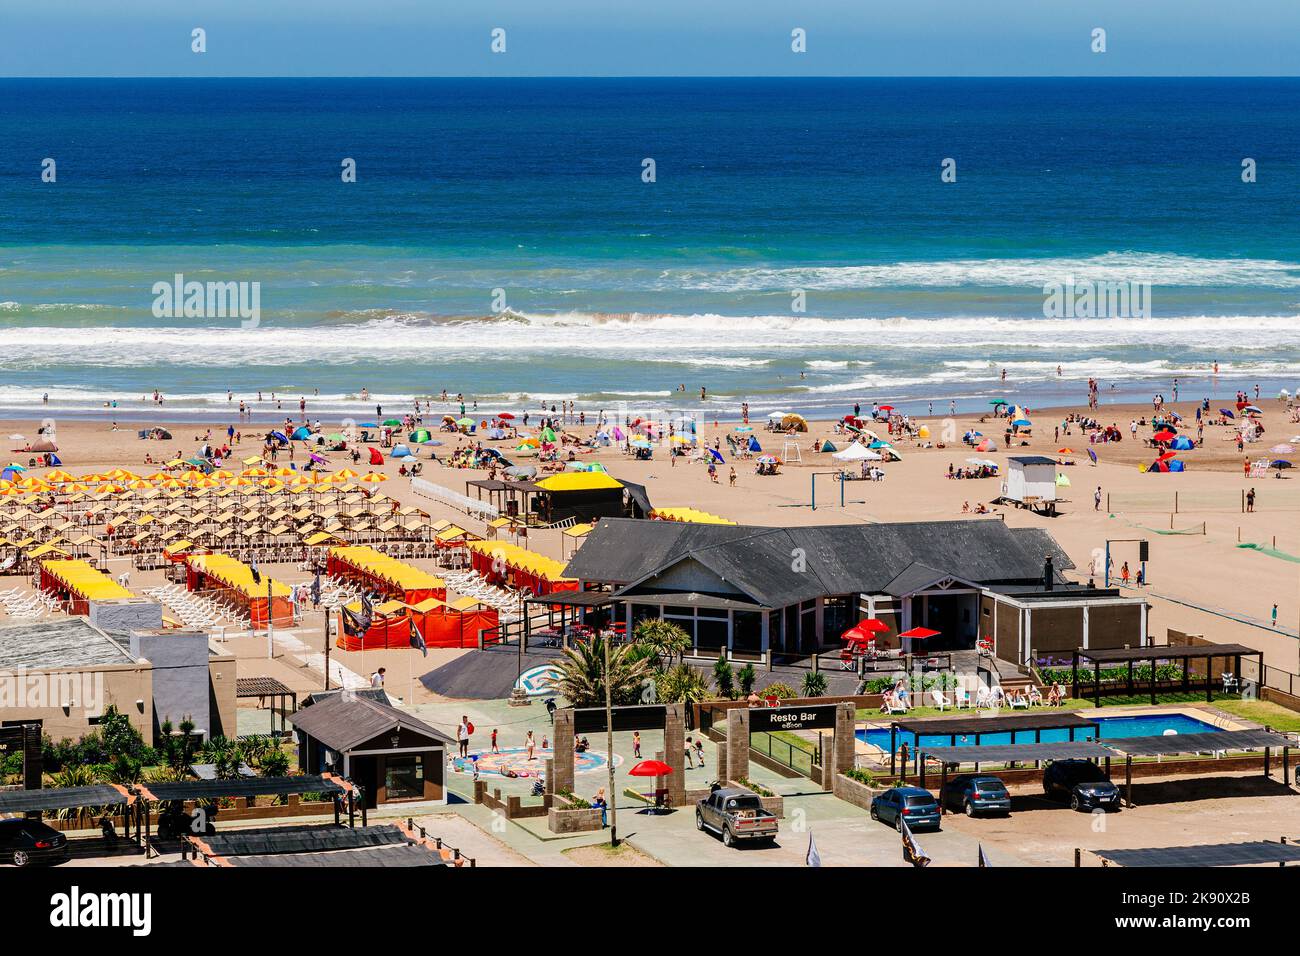 NECOCHEA, BUENOS AIRES, ARGENTINA - JANUARY 5, 2022: Aerial view of the main beach in the city downtown. Stock Photo